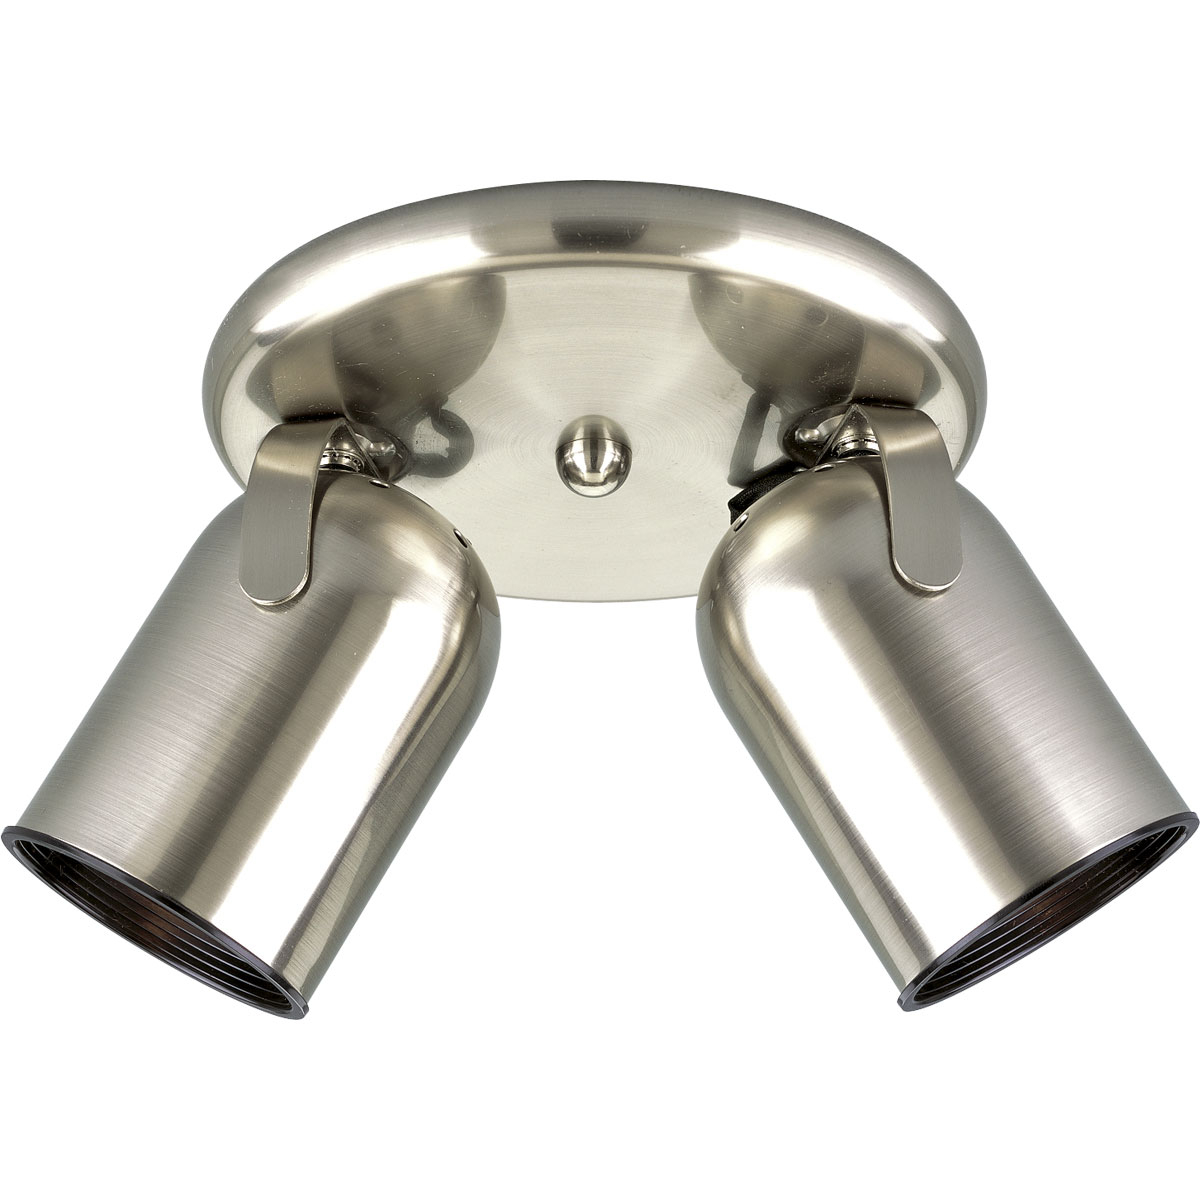 Two-light round back ceiling mount directional in Brushed Nickel finish.